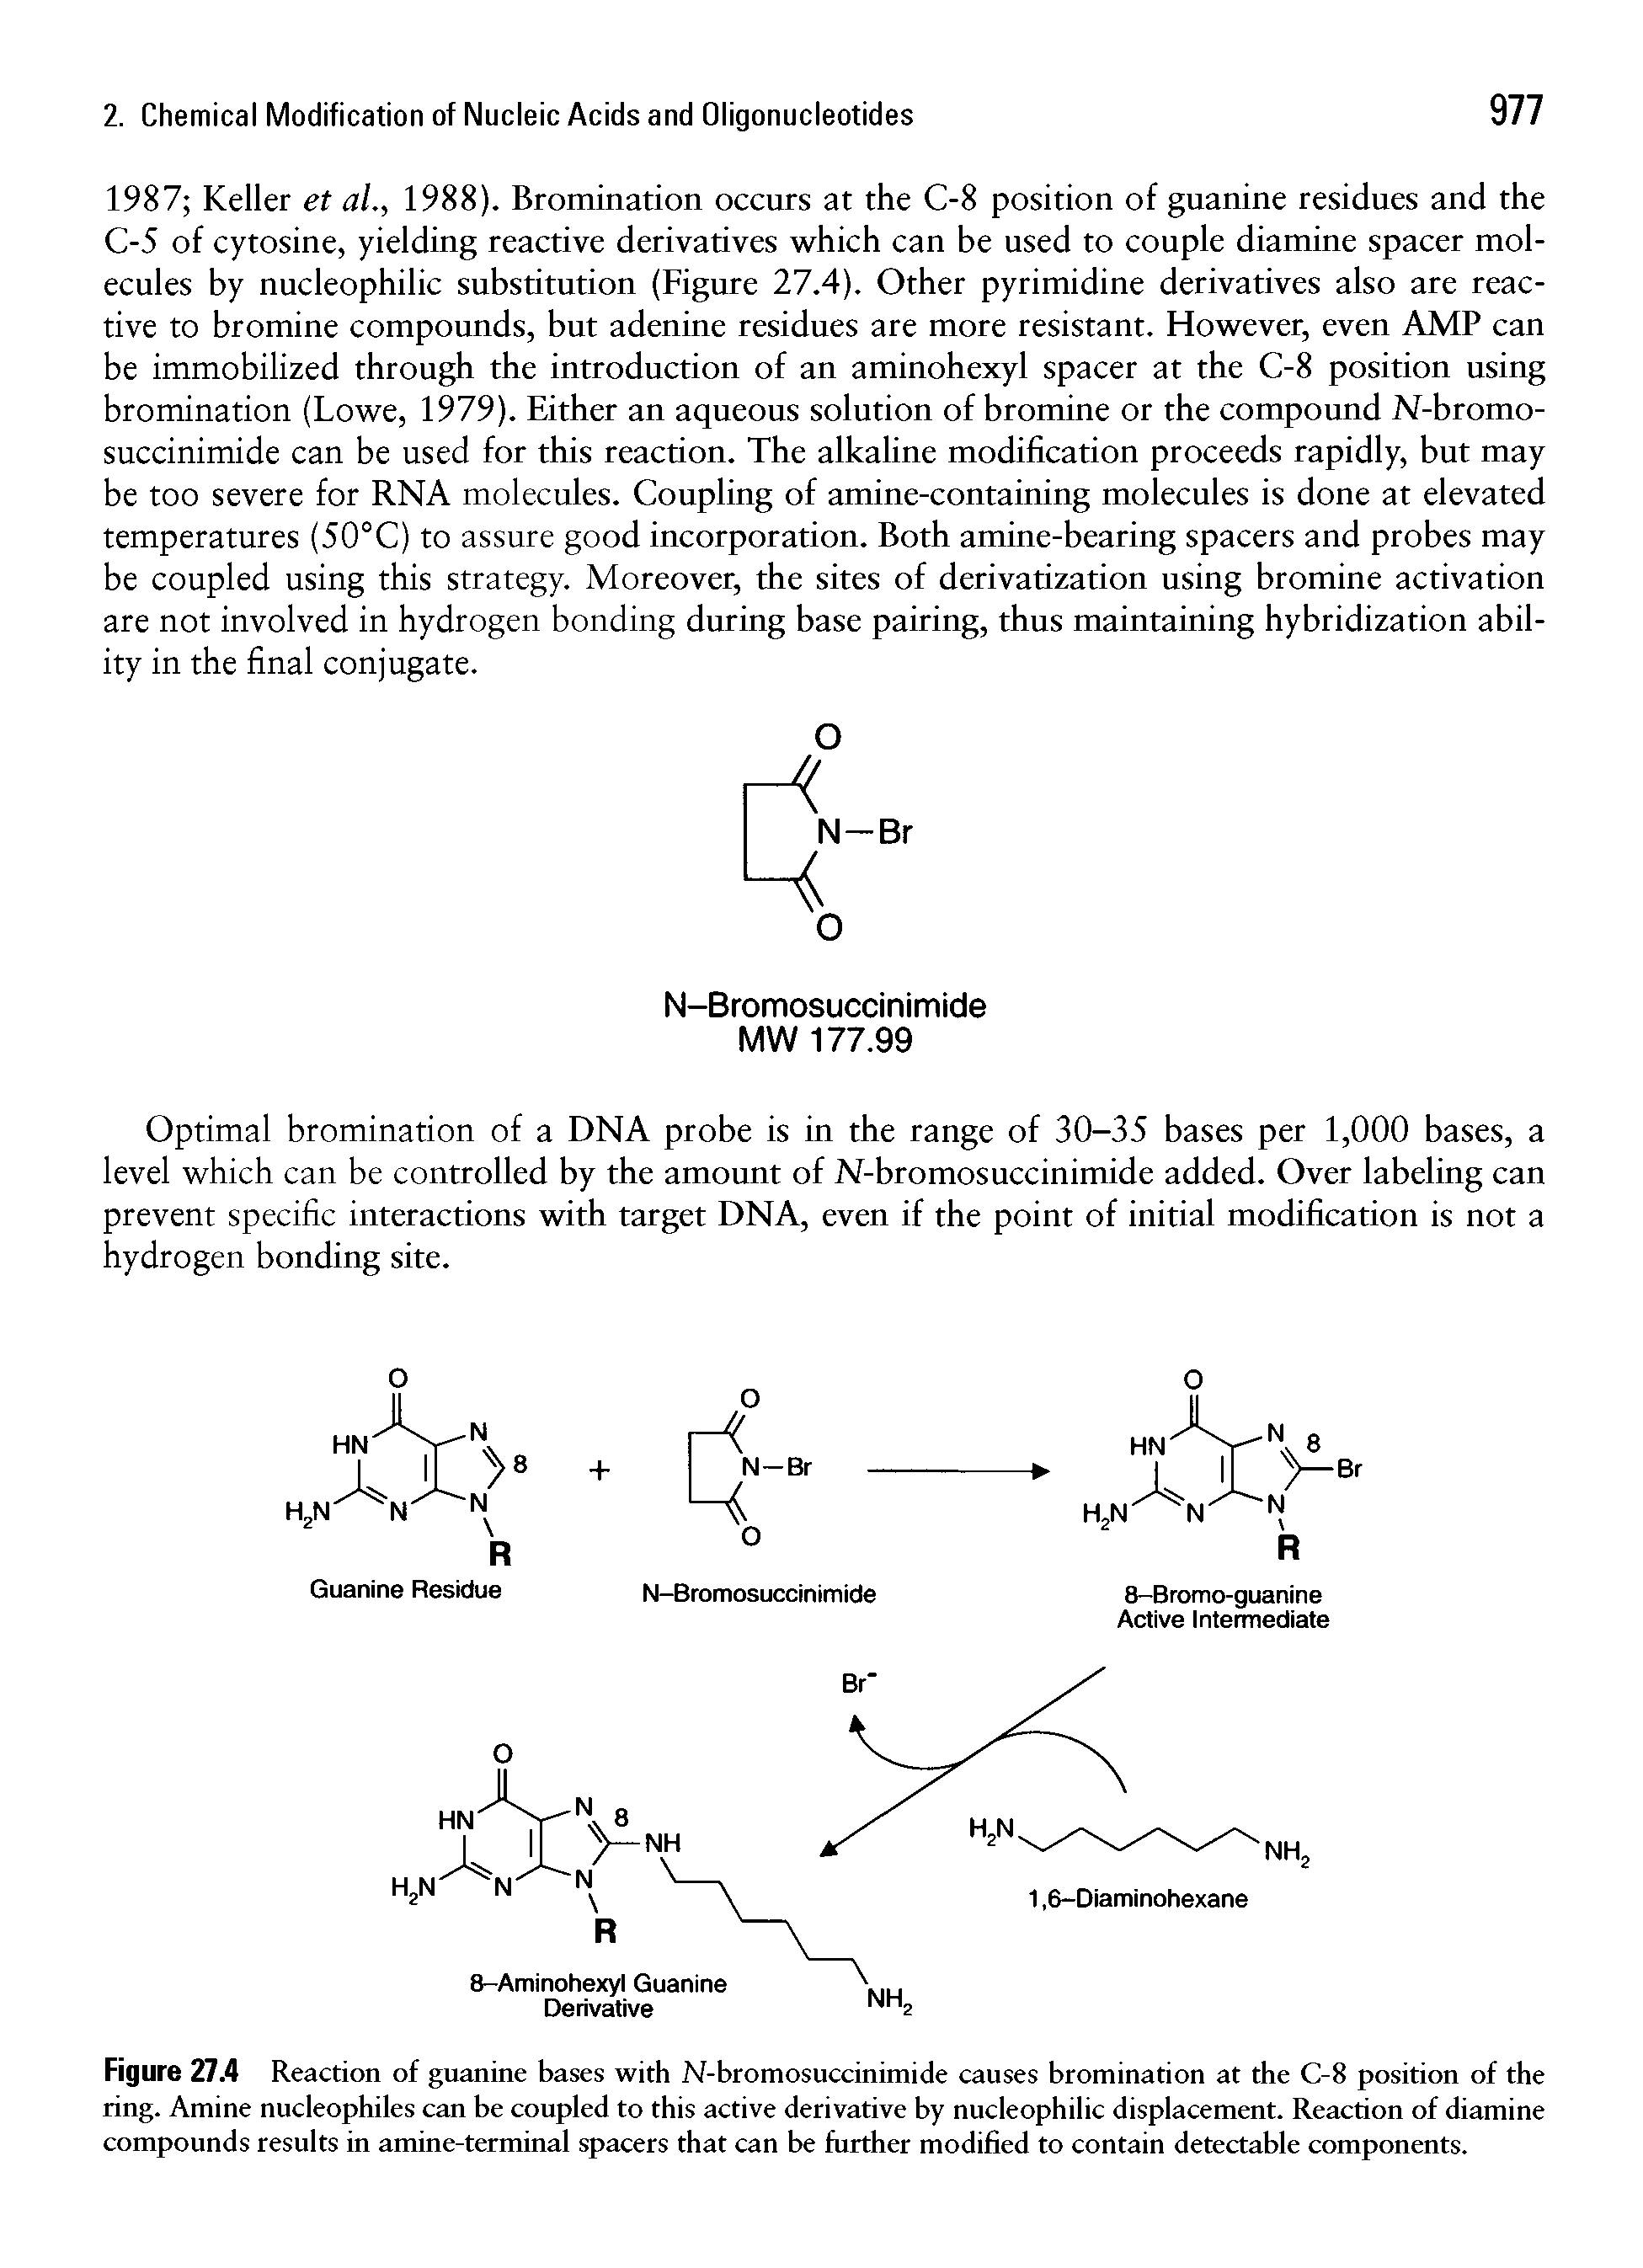 Figure 27.4 Reaction of guanine bases with N-bromosuccinimide causes bromination at the C-8 position of the ring. Amine nucleophiles can be coupled to this active derivative by nucleophilic displacement. Reaction of diamine compounds results in amine-terminal spacers that can be further modified to contain detectable components.